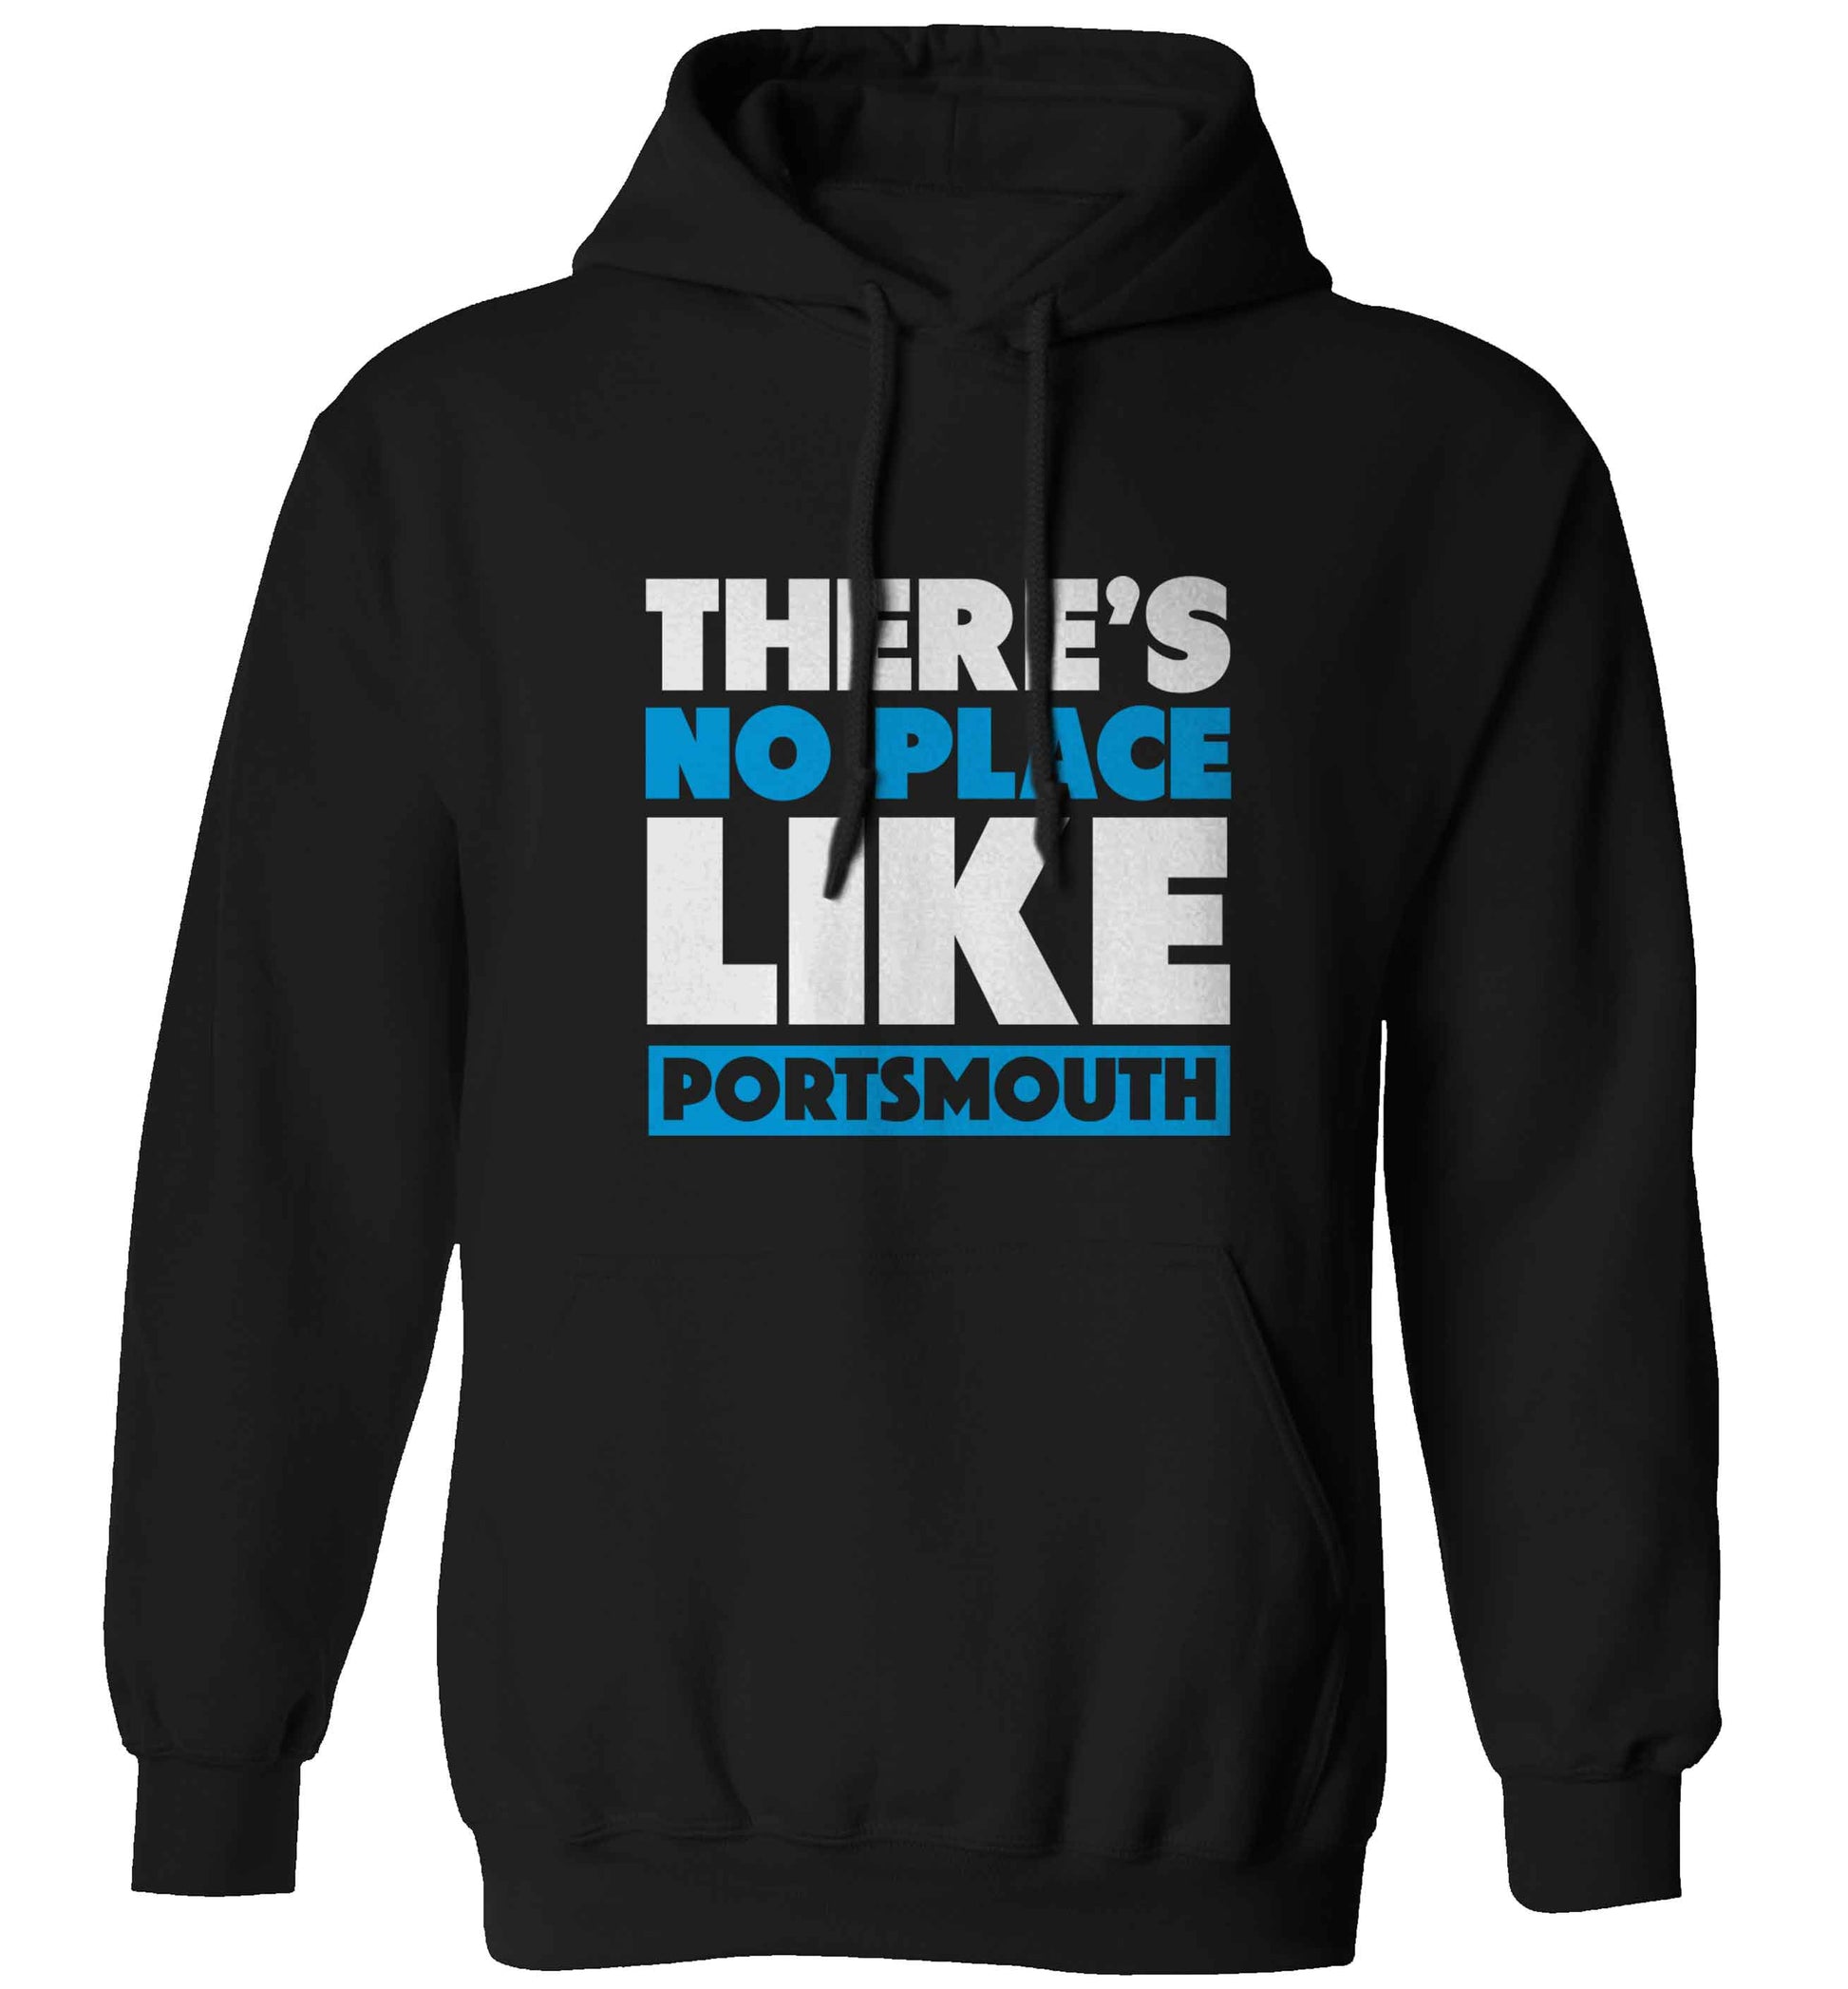 There's no place like Porstmouth adults unisex black hoodie 2XL